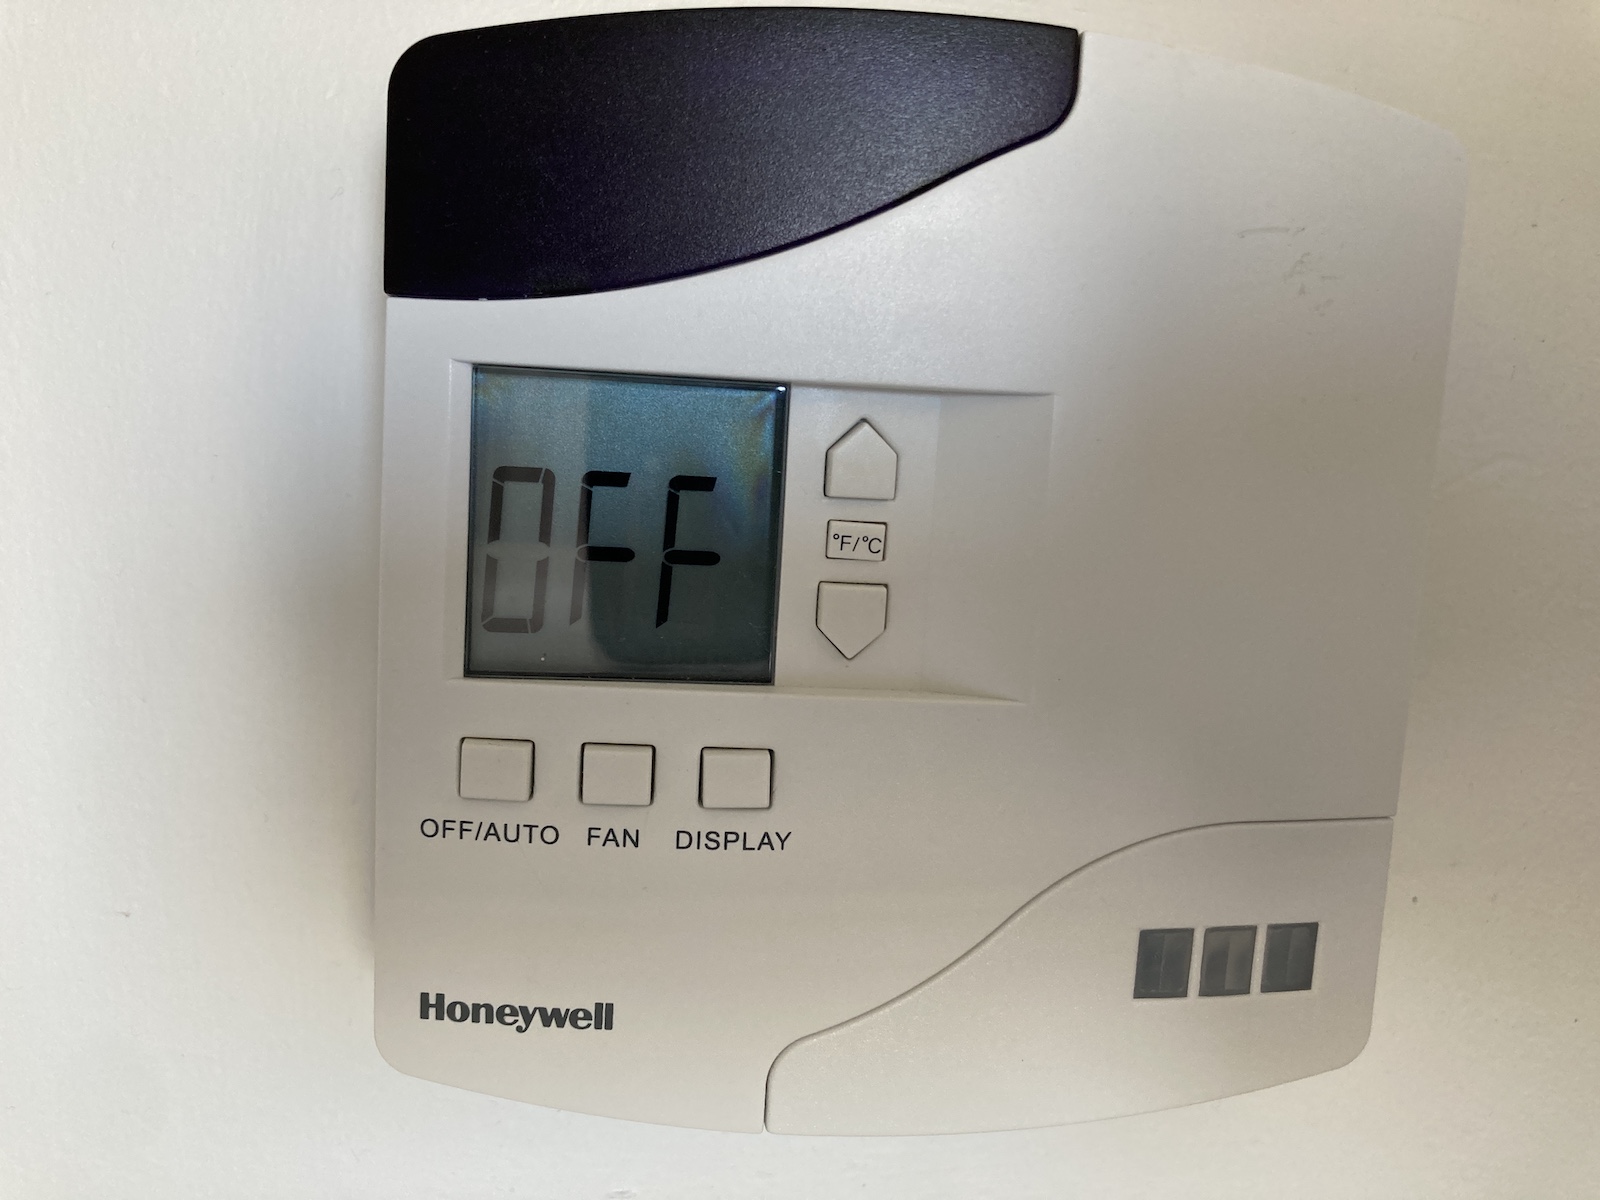 Image of thermostat on the wall